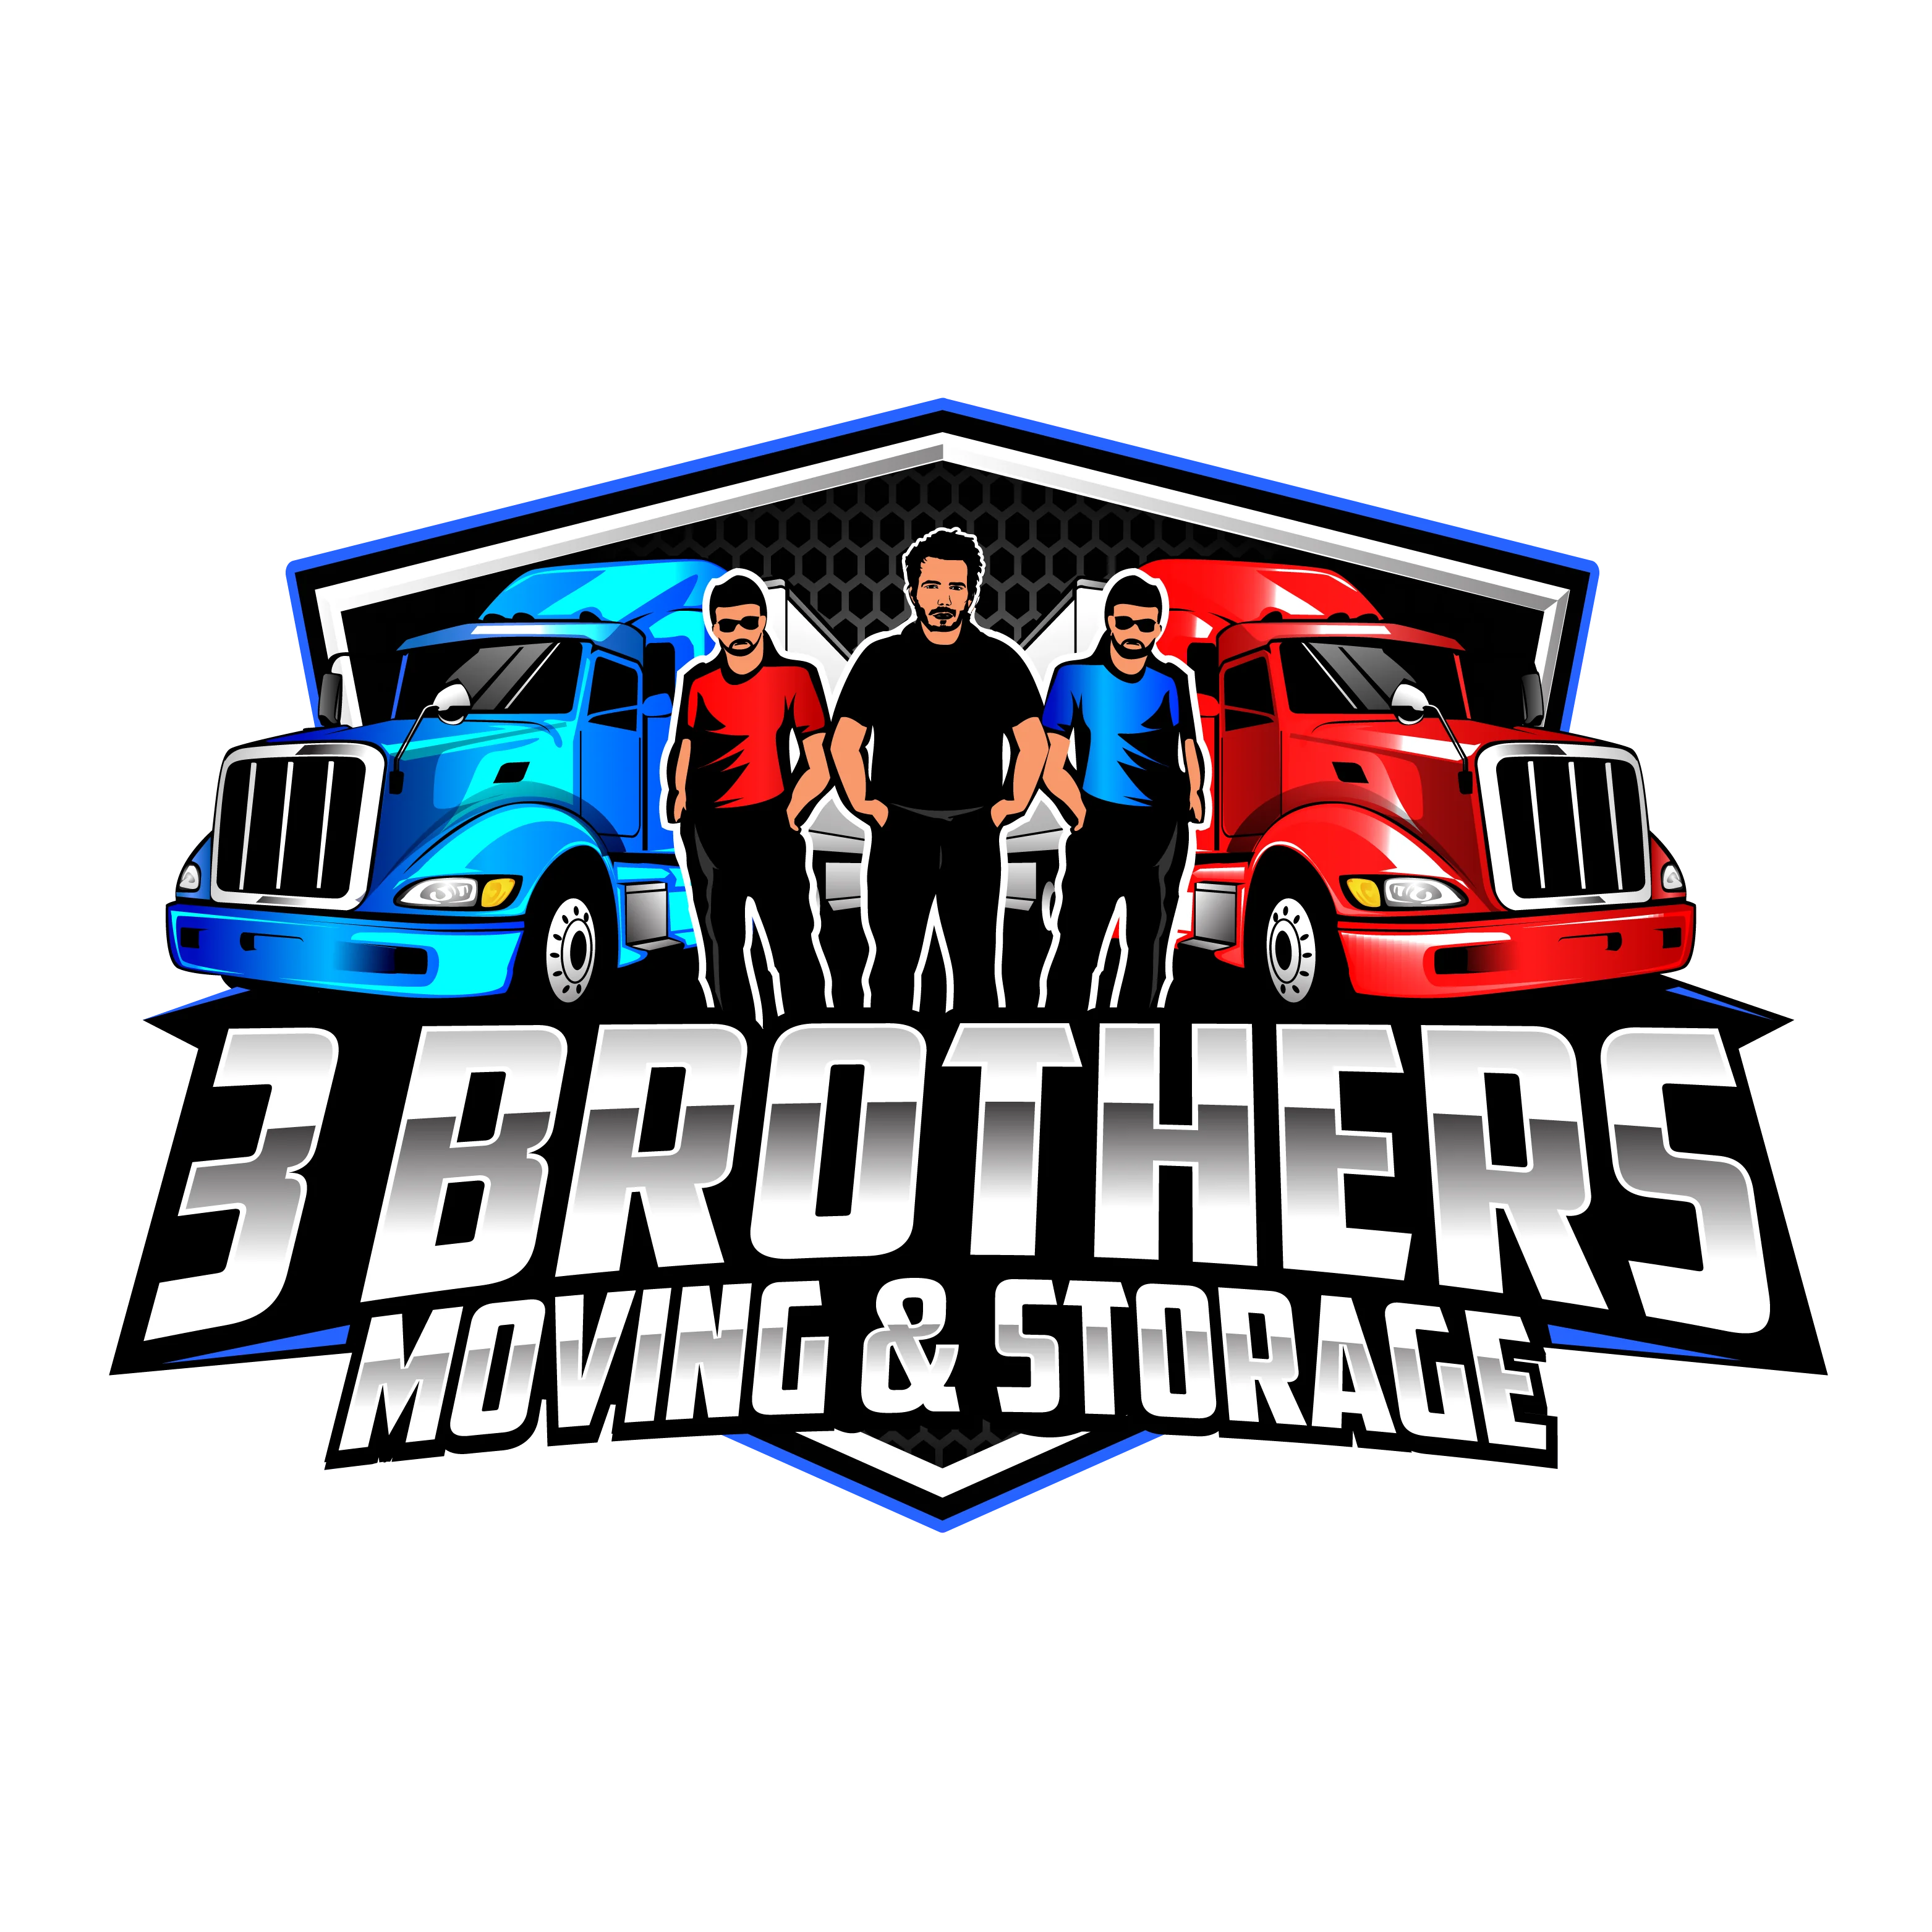 3 Brothers Moving & Storage